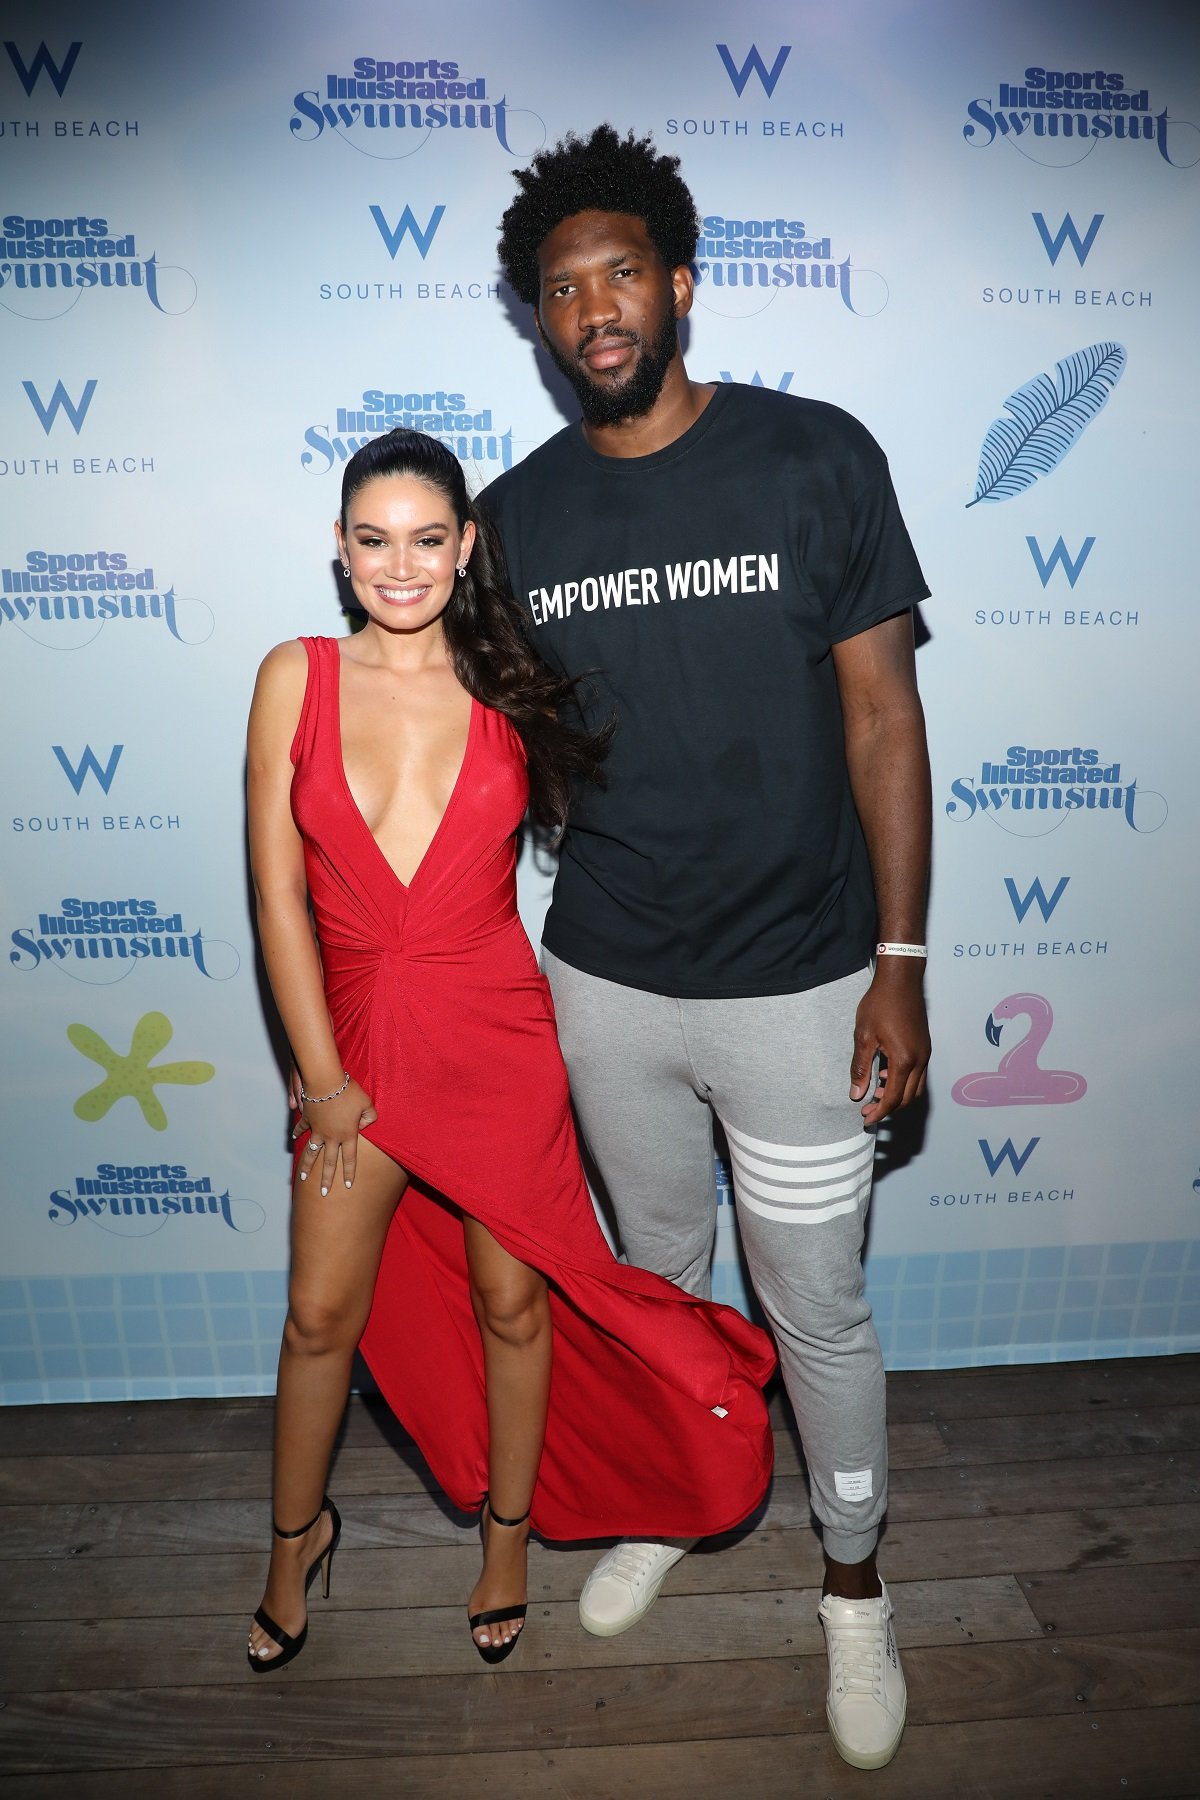 Anne de Paula and Joel Embiid attend the 2019 Sports Illustrated Swimsuit Runway Show